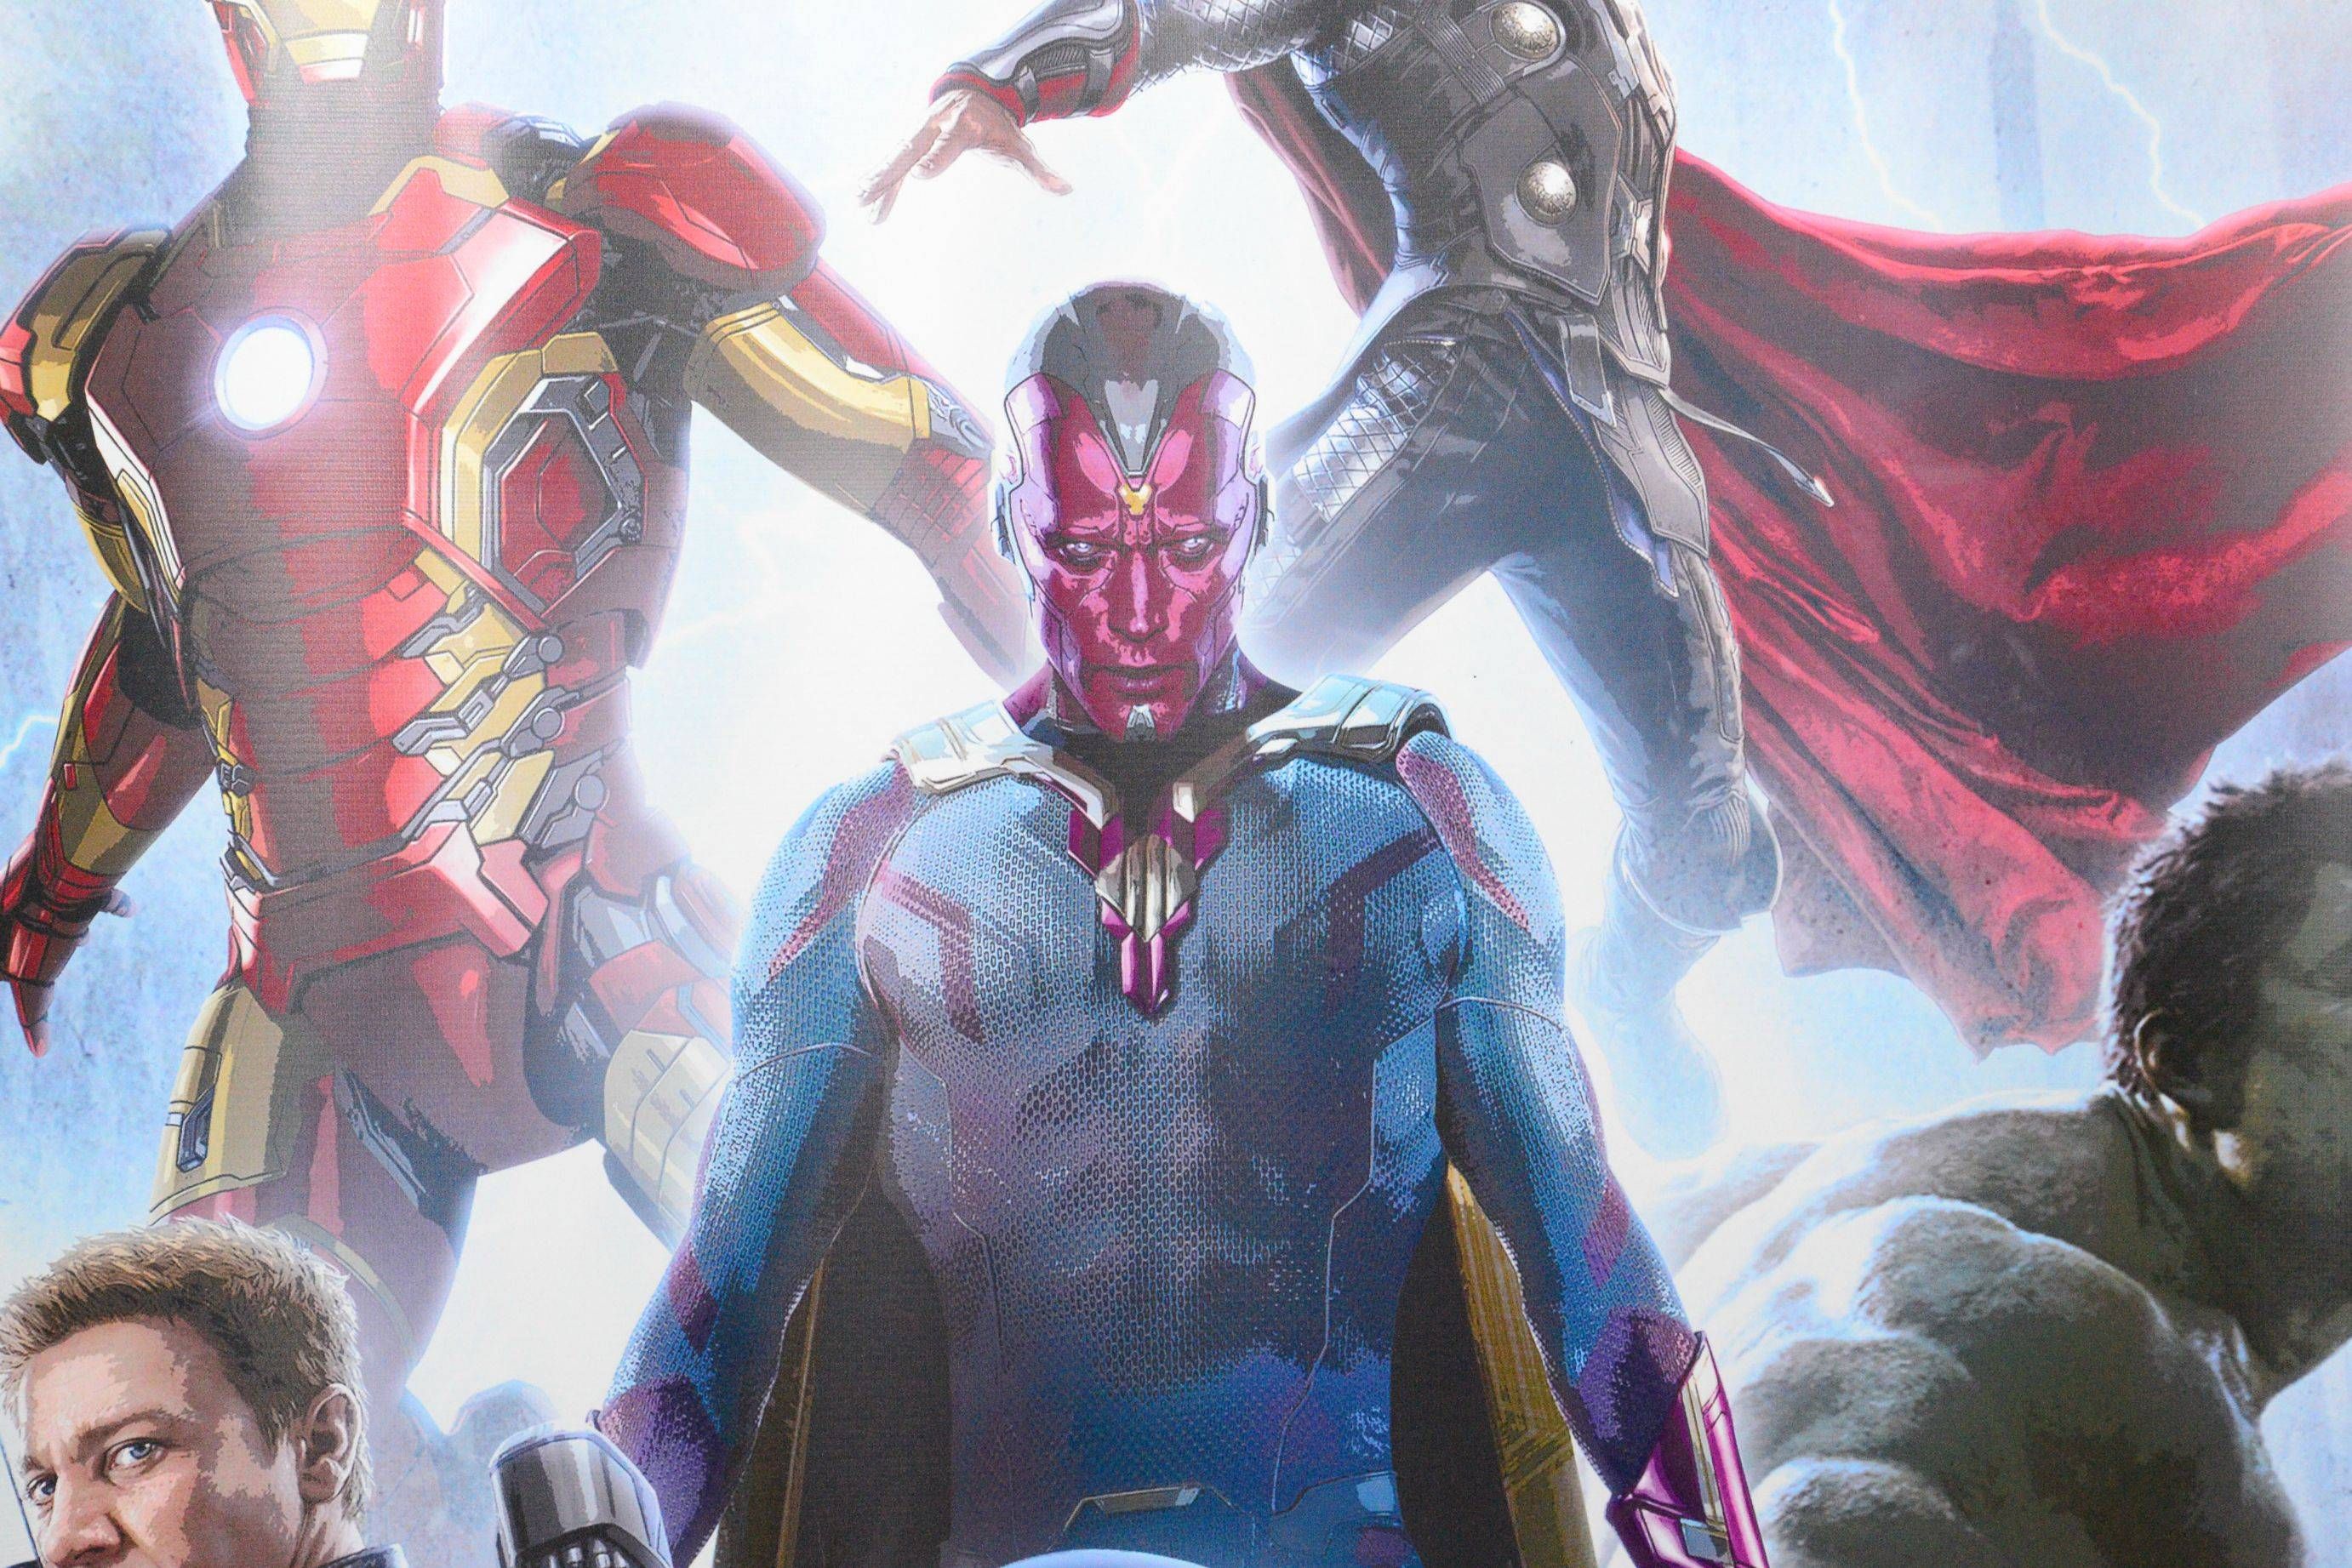 vision-avengers-2-age-of-ultron-image-2.